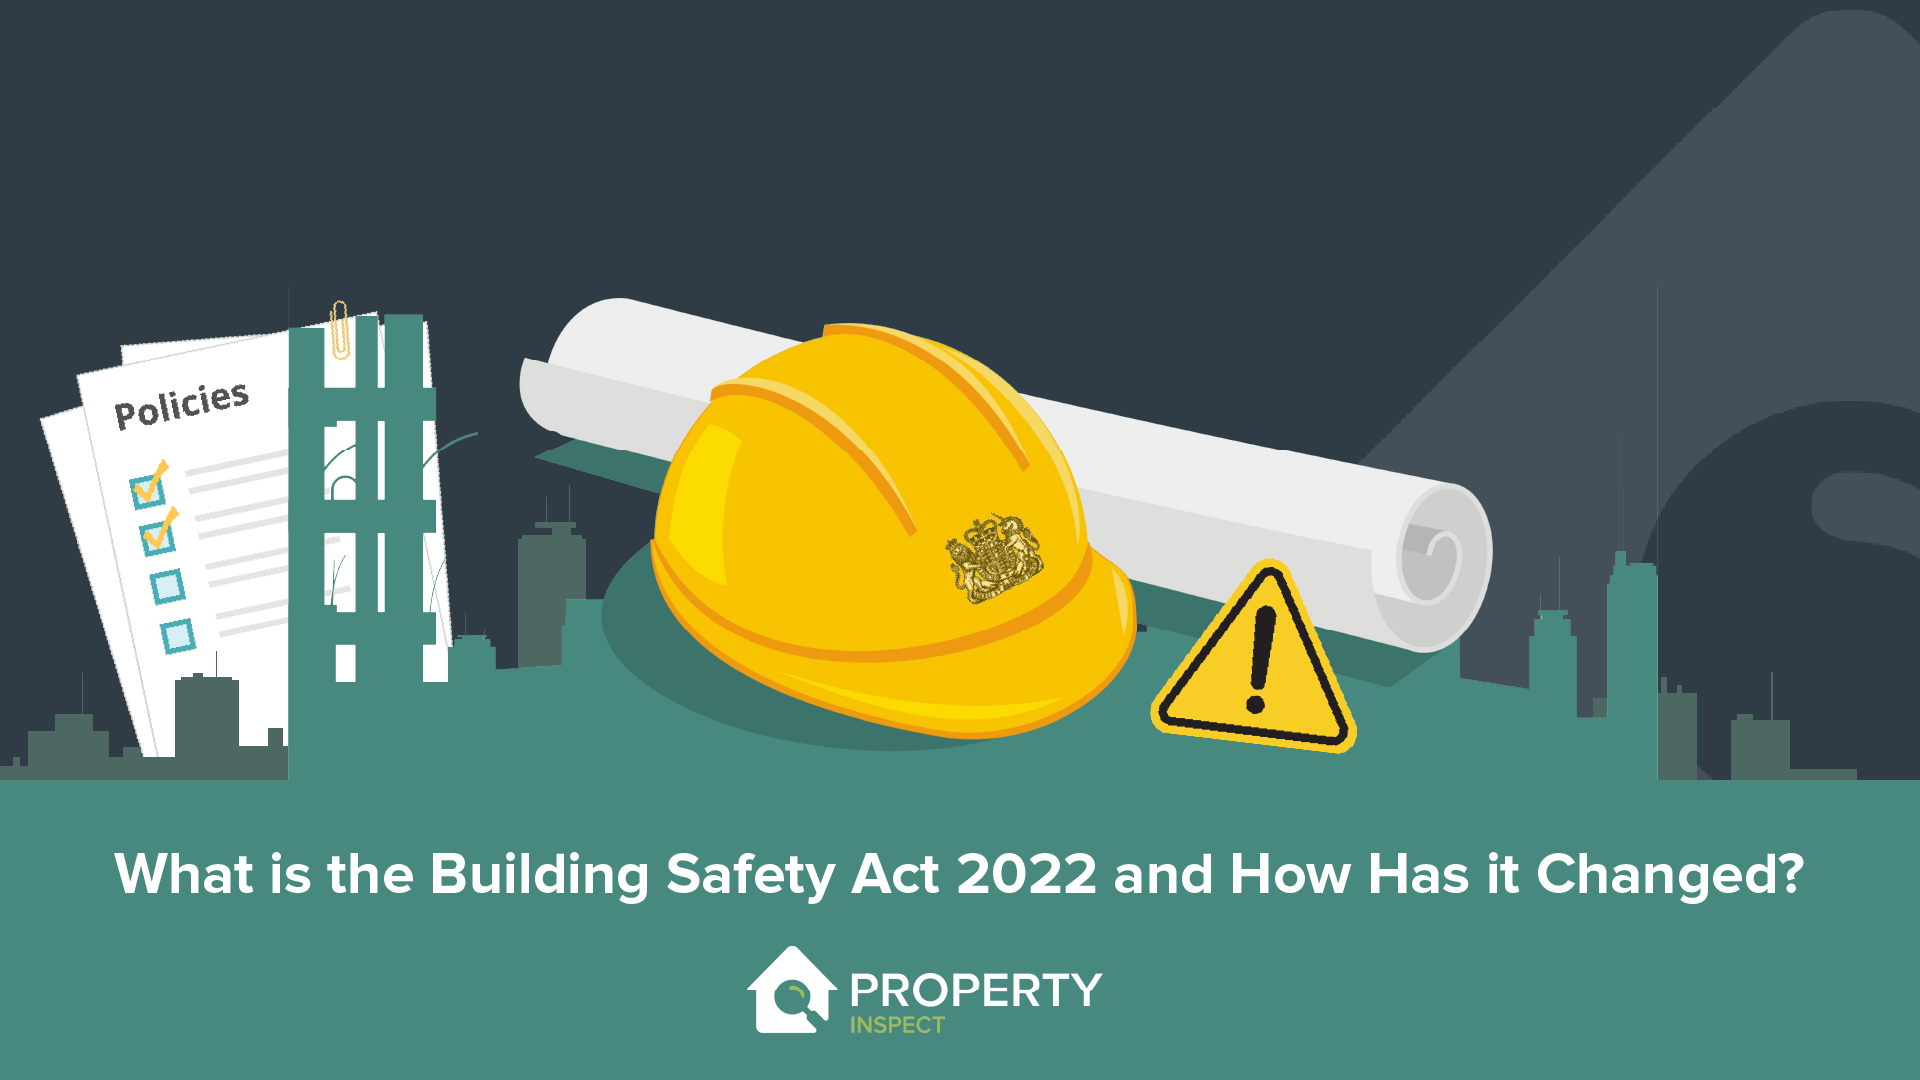 What is the Building Safety Act 2022 and How Has it Changed?